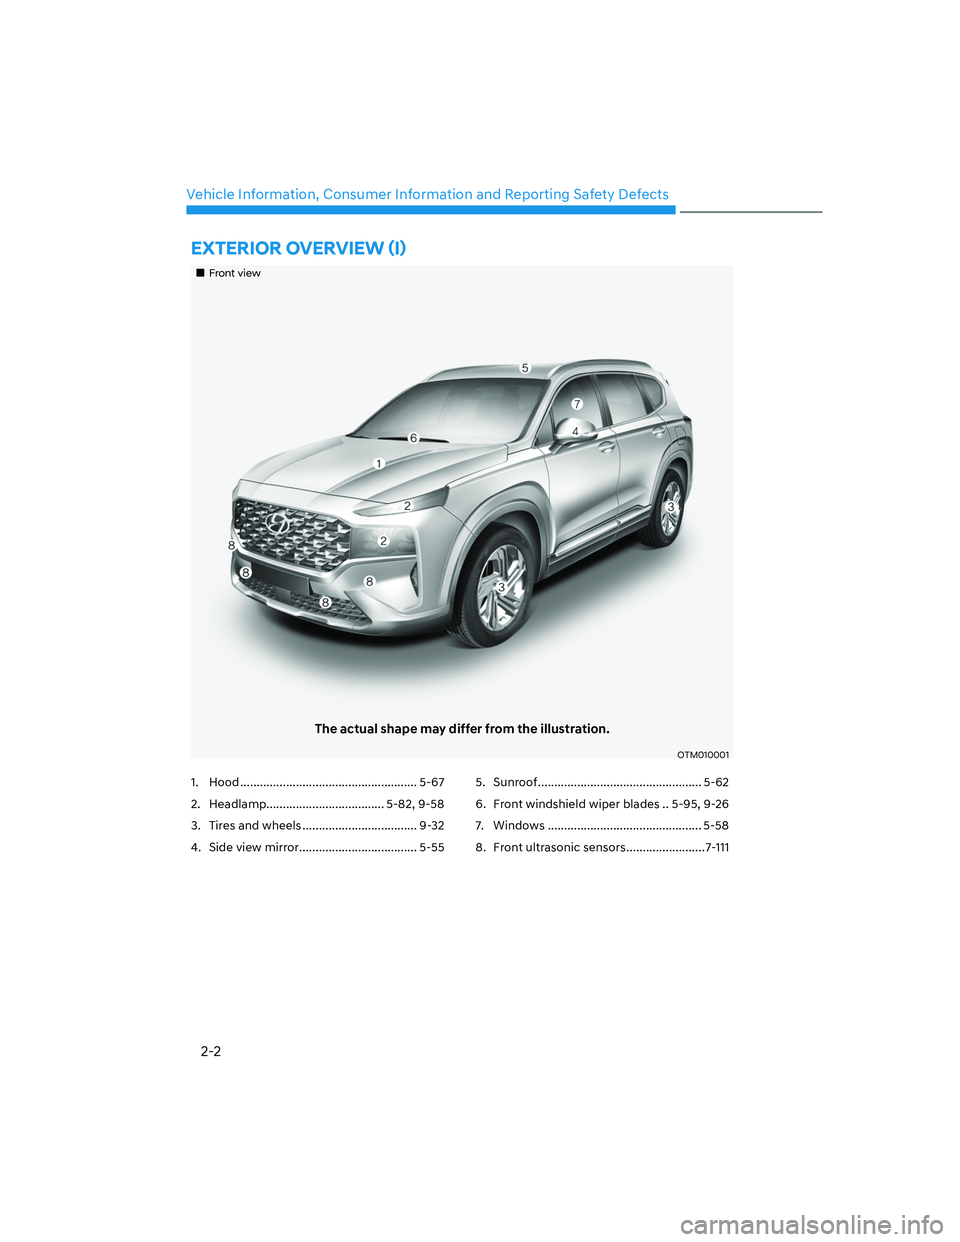 HYUNDAI SANTA FE 2022 User Guide 2-2
Vehicle Information, Consumer Information and Reporting Safety Defects
�(�;�7�(�5�,�2�5��2�9�(�5�9�,�(�:�